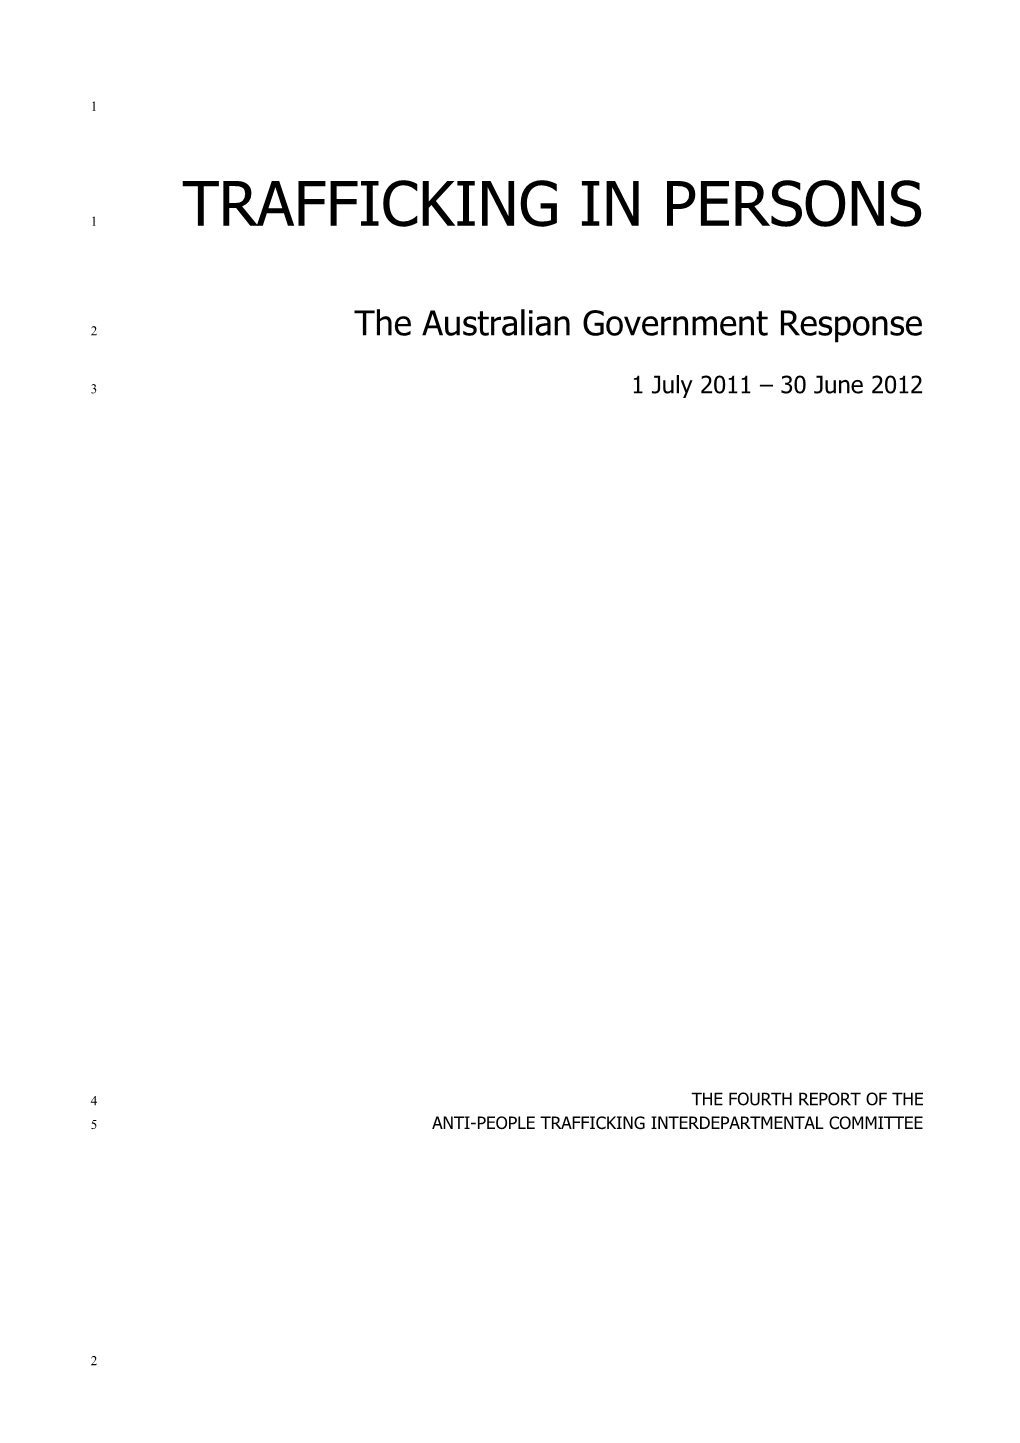 Report of the Anti-People Trafficking Interdepartmental Committee - July 2012 to June 2012